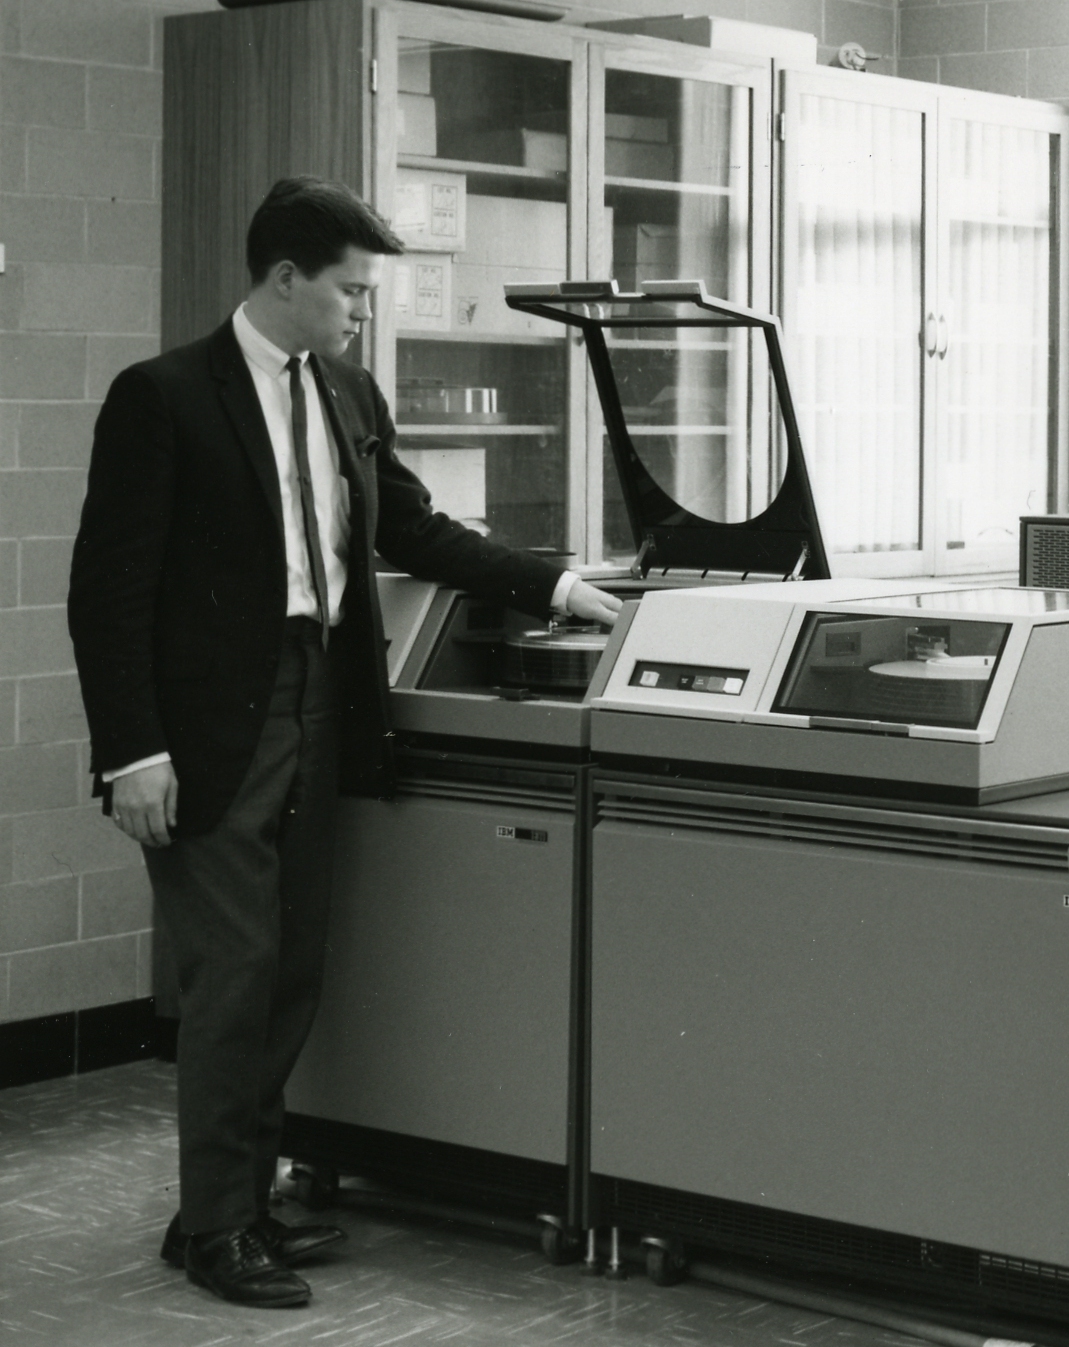 Jim Mitchell, shown here, was one of the four Waterloo Undergraduates who, in 1965, wrote the first Watfor compiler for the IBM 1620.